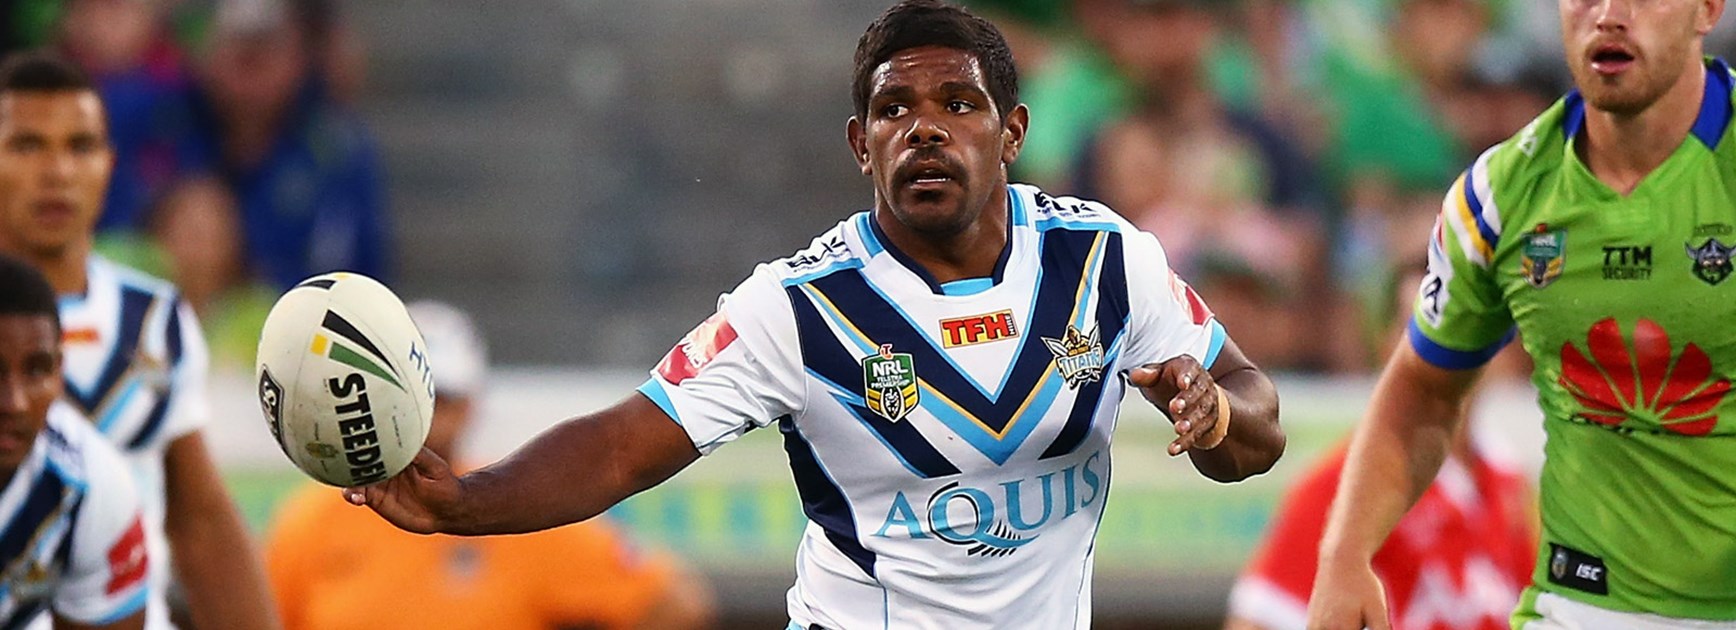 Titans hooker Kierran Moseley returns to first grade in Round 8.